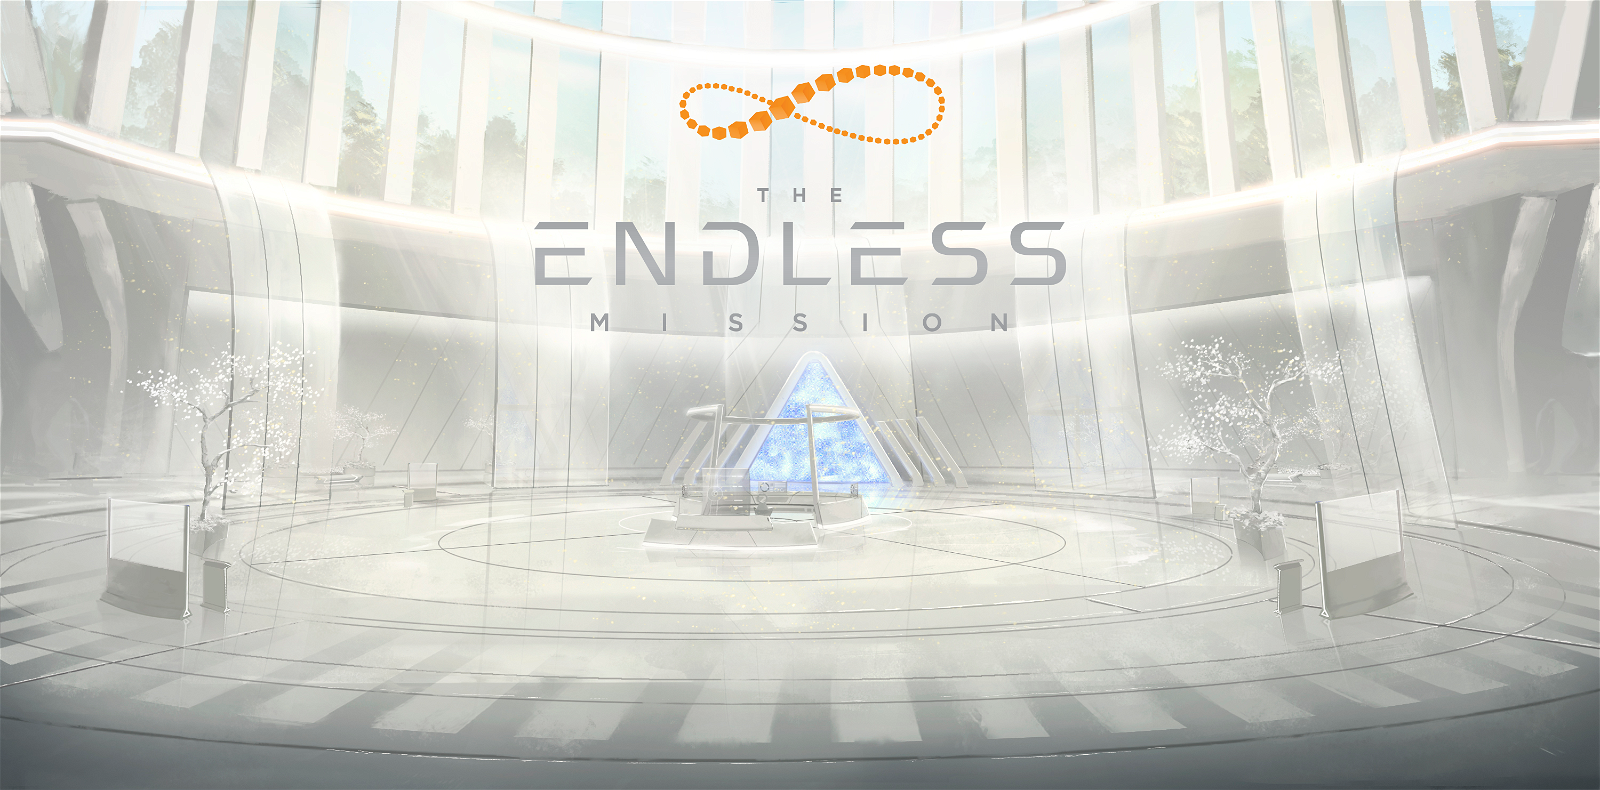 Image of The Endless Mission